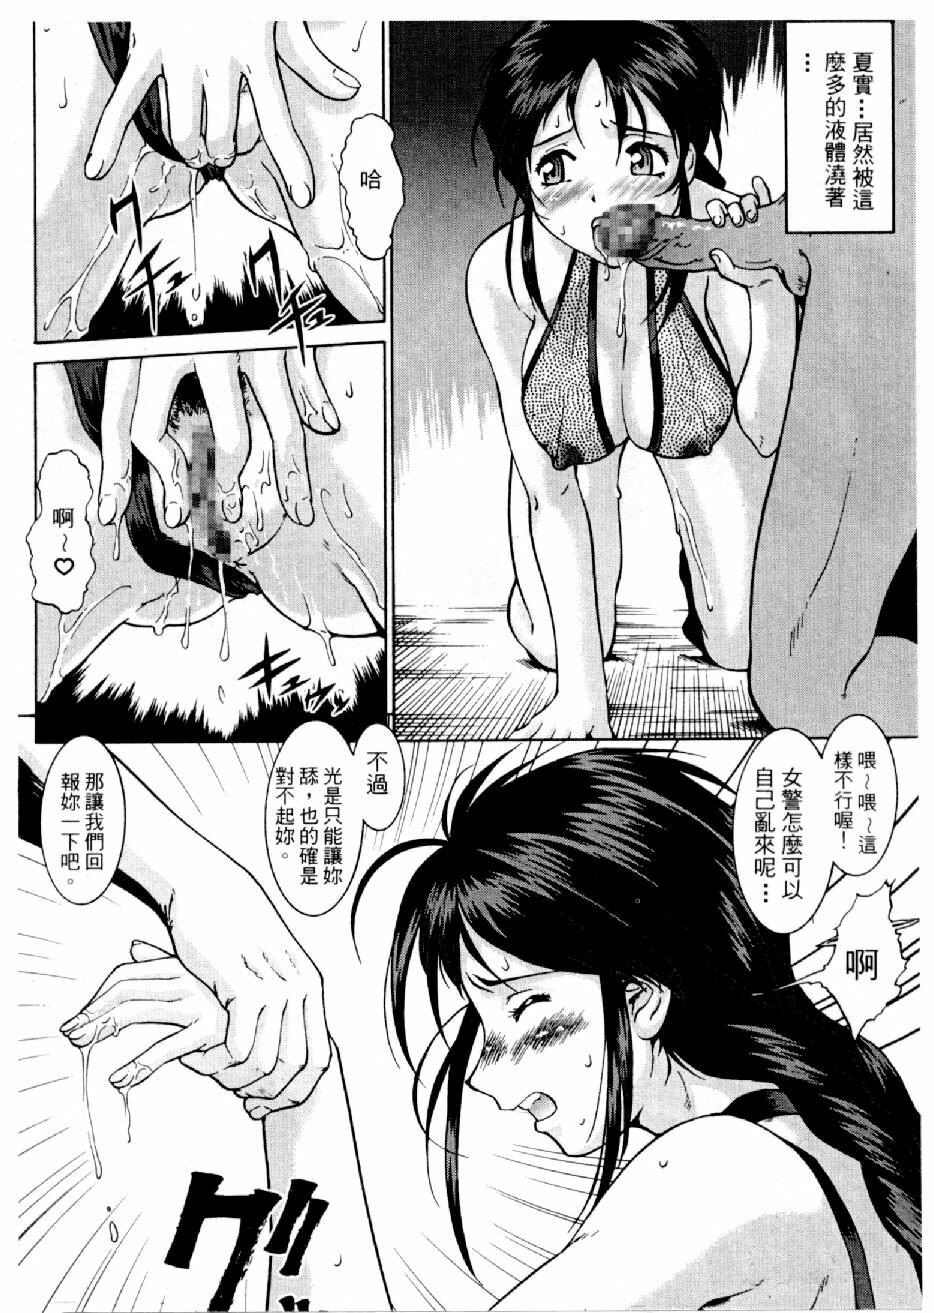 [Mizuno Kei] Cutie Police Woman 2 (You're Under Arrest) [Chinese] page 23 full